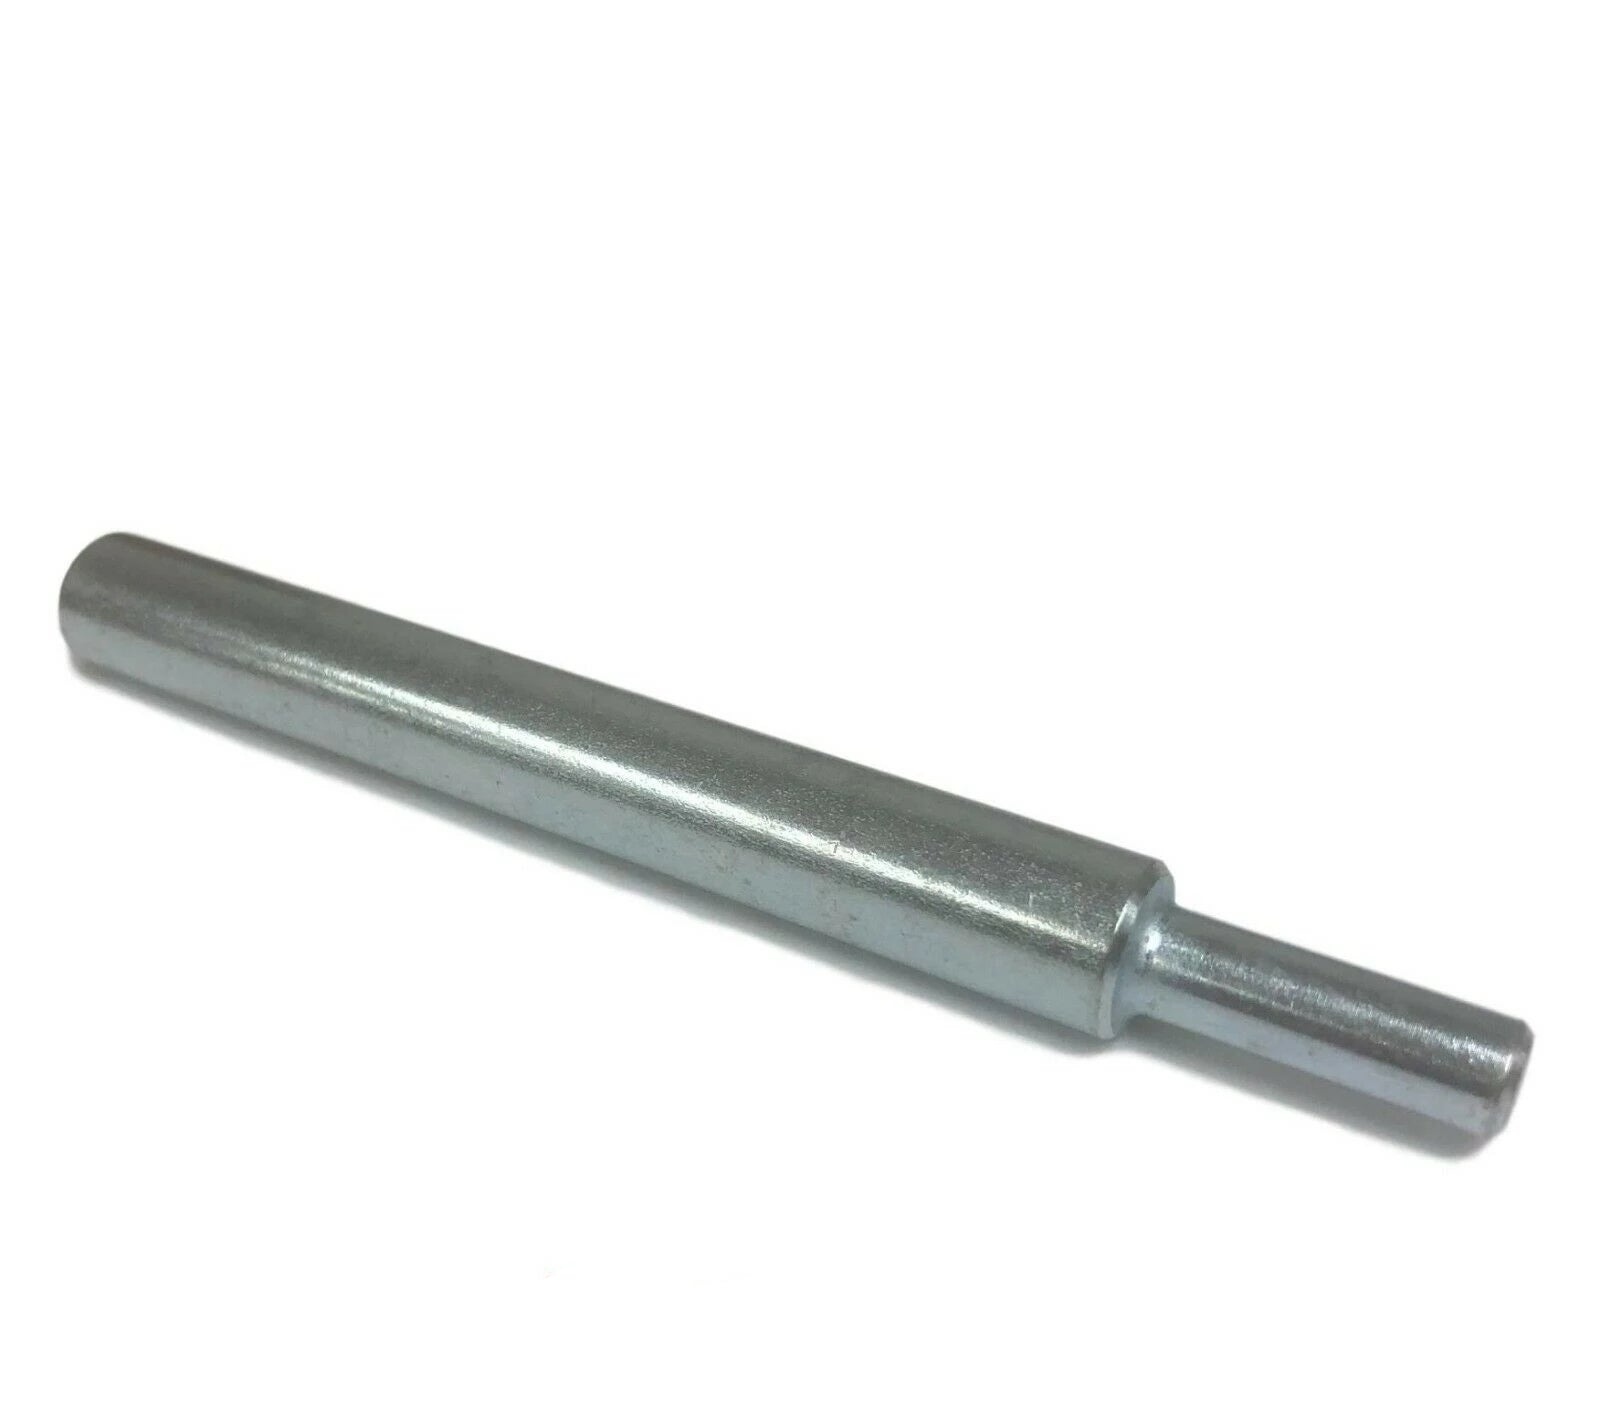 (QTY 1) 1/2" Setting Tool for 1/2-13 Concrete Drop-In Anchors